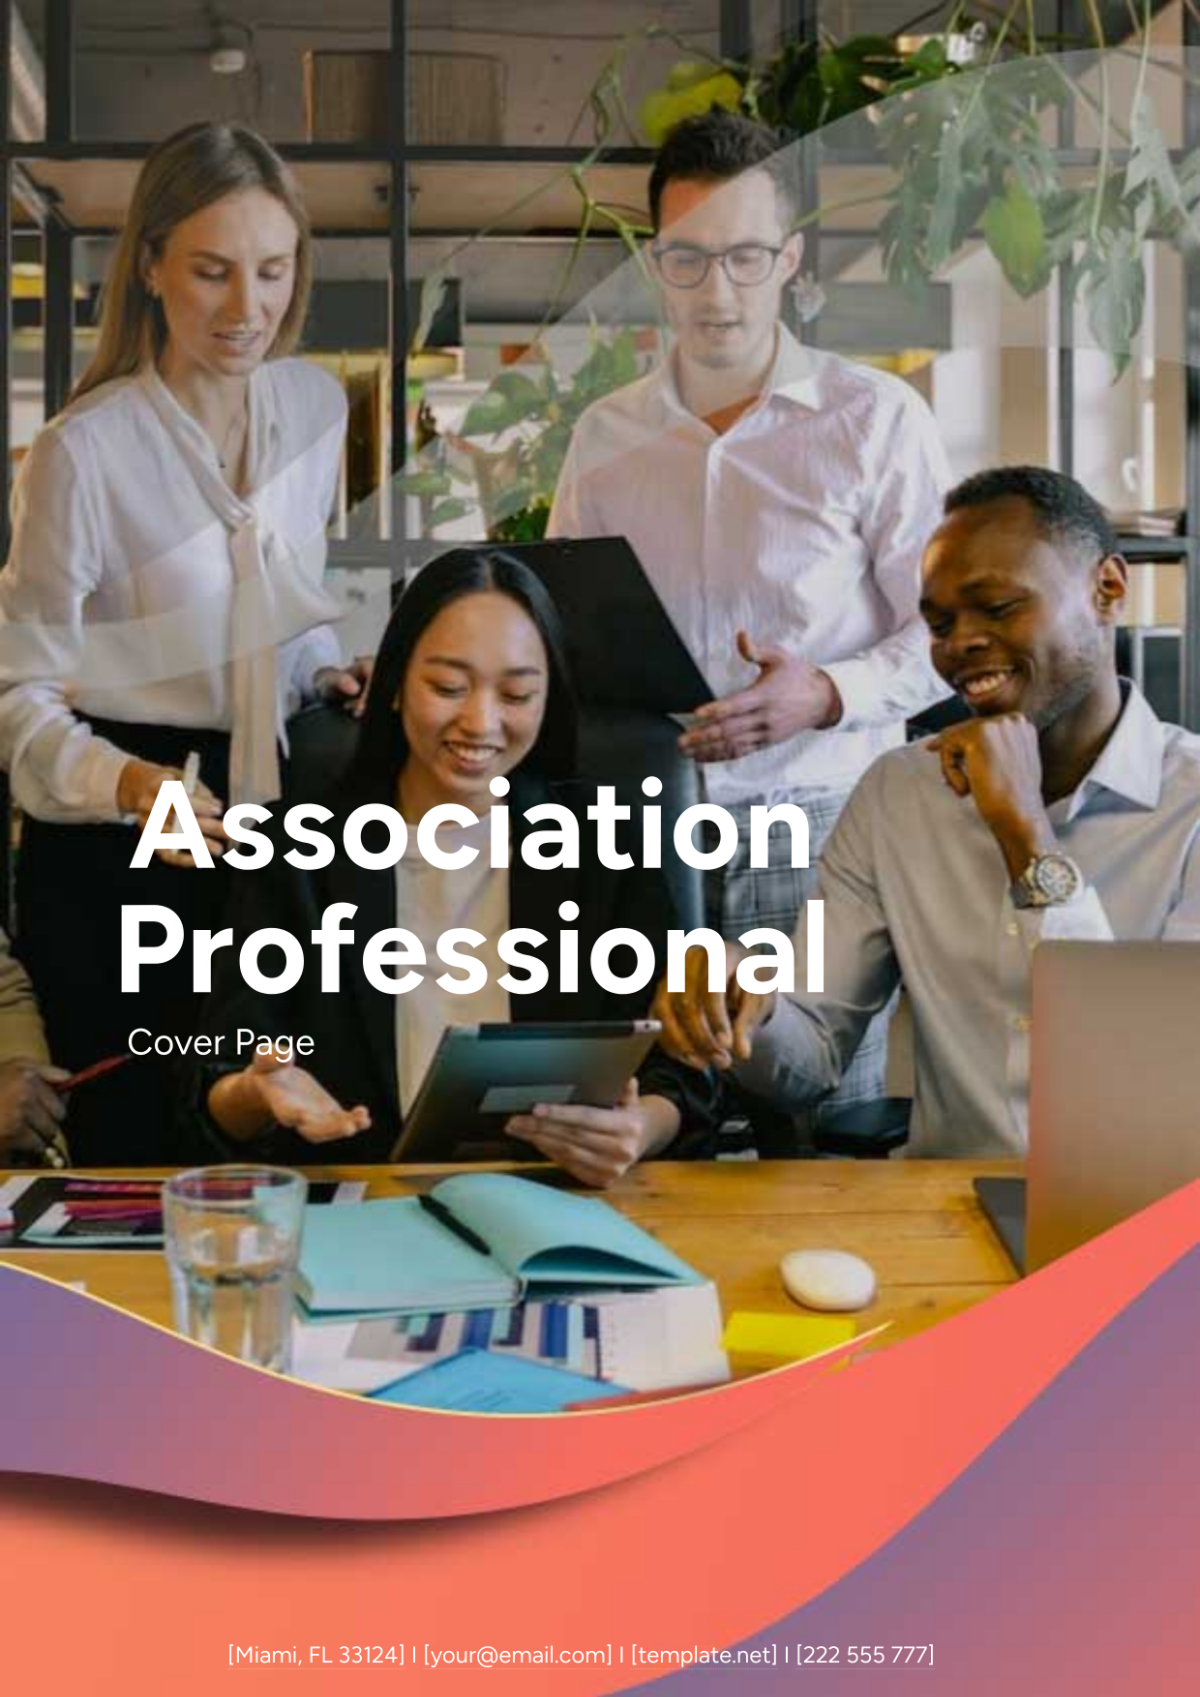 Association Professional Cover Page